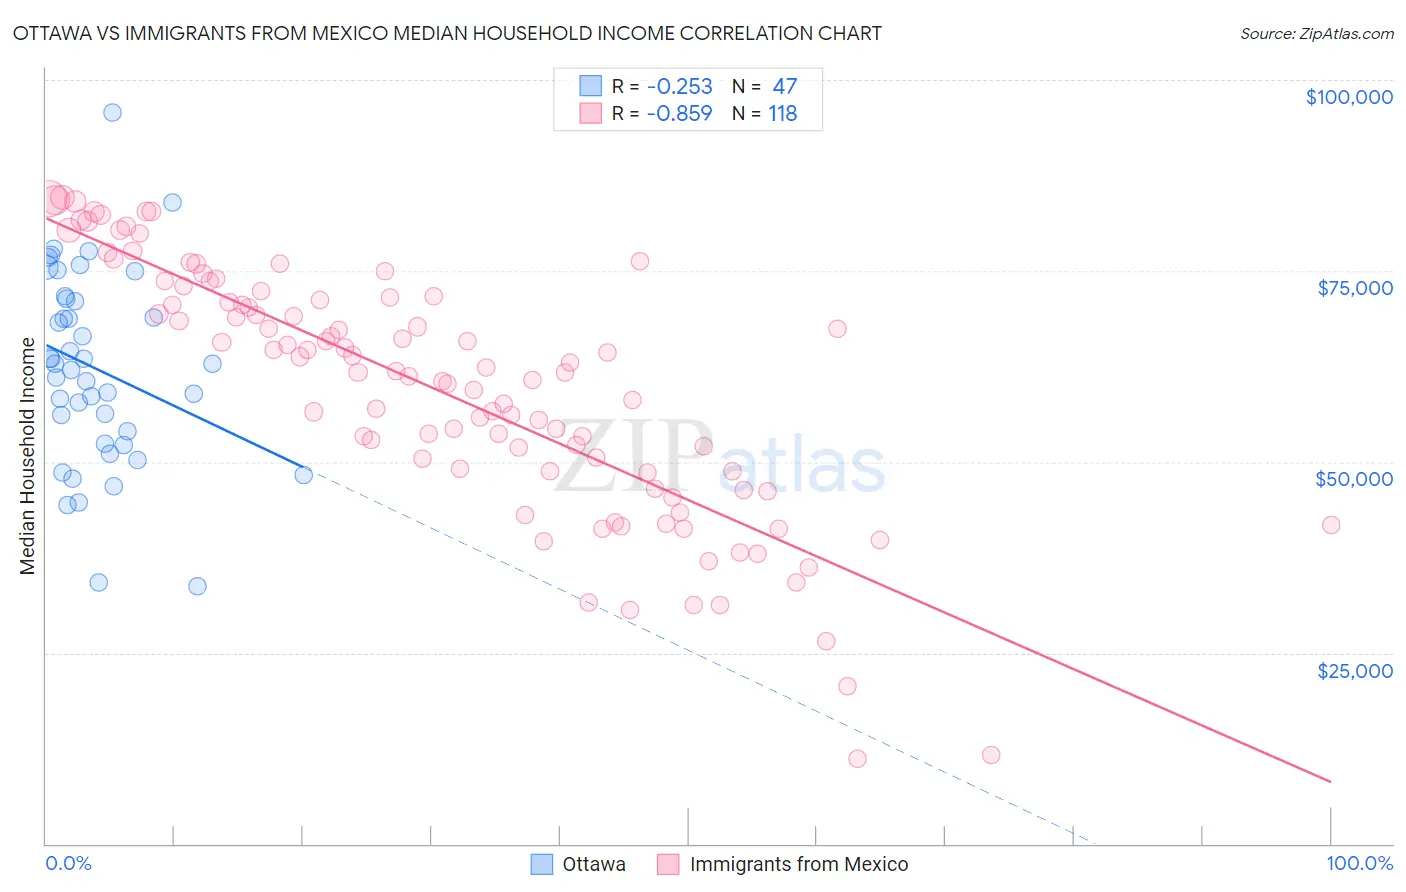 Ottawa vs Immigrants from Mexico Median Household Income